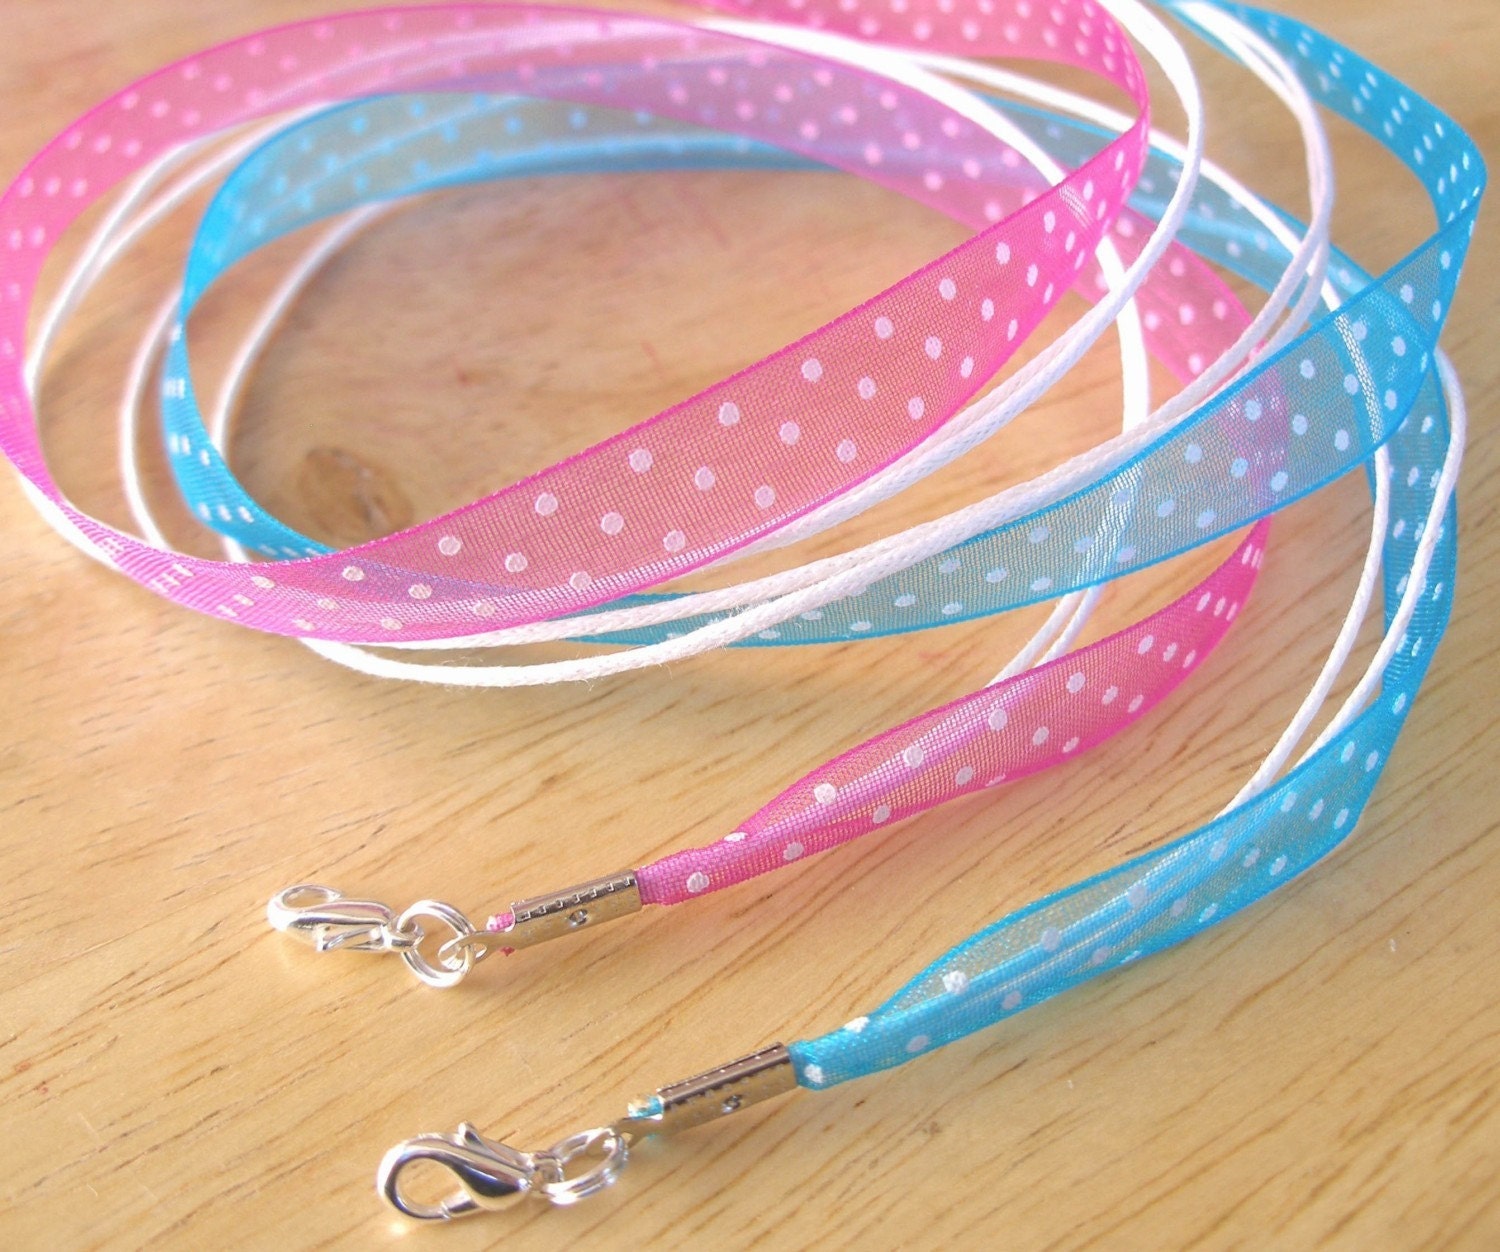 20 - Polka Dot Organza Cord Necklaces - 8 Colors, Any length, Fits Scrabble/Glass Tile Pendants - Handmade in USA